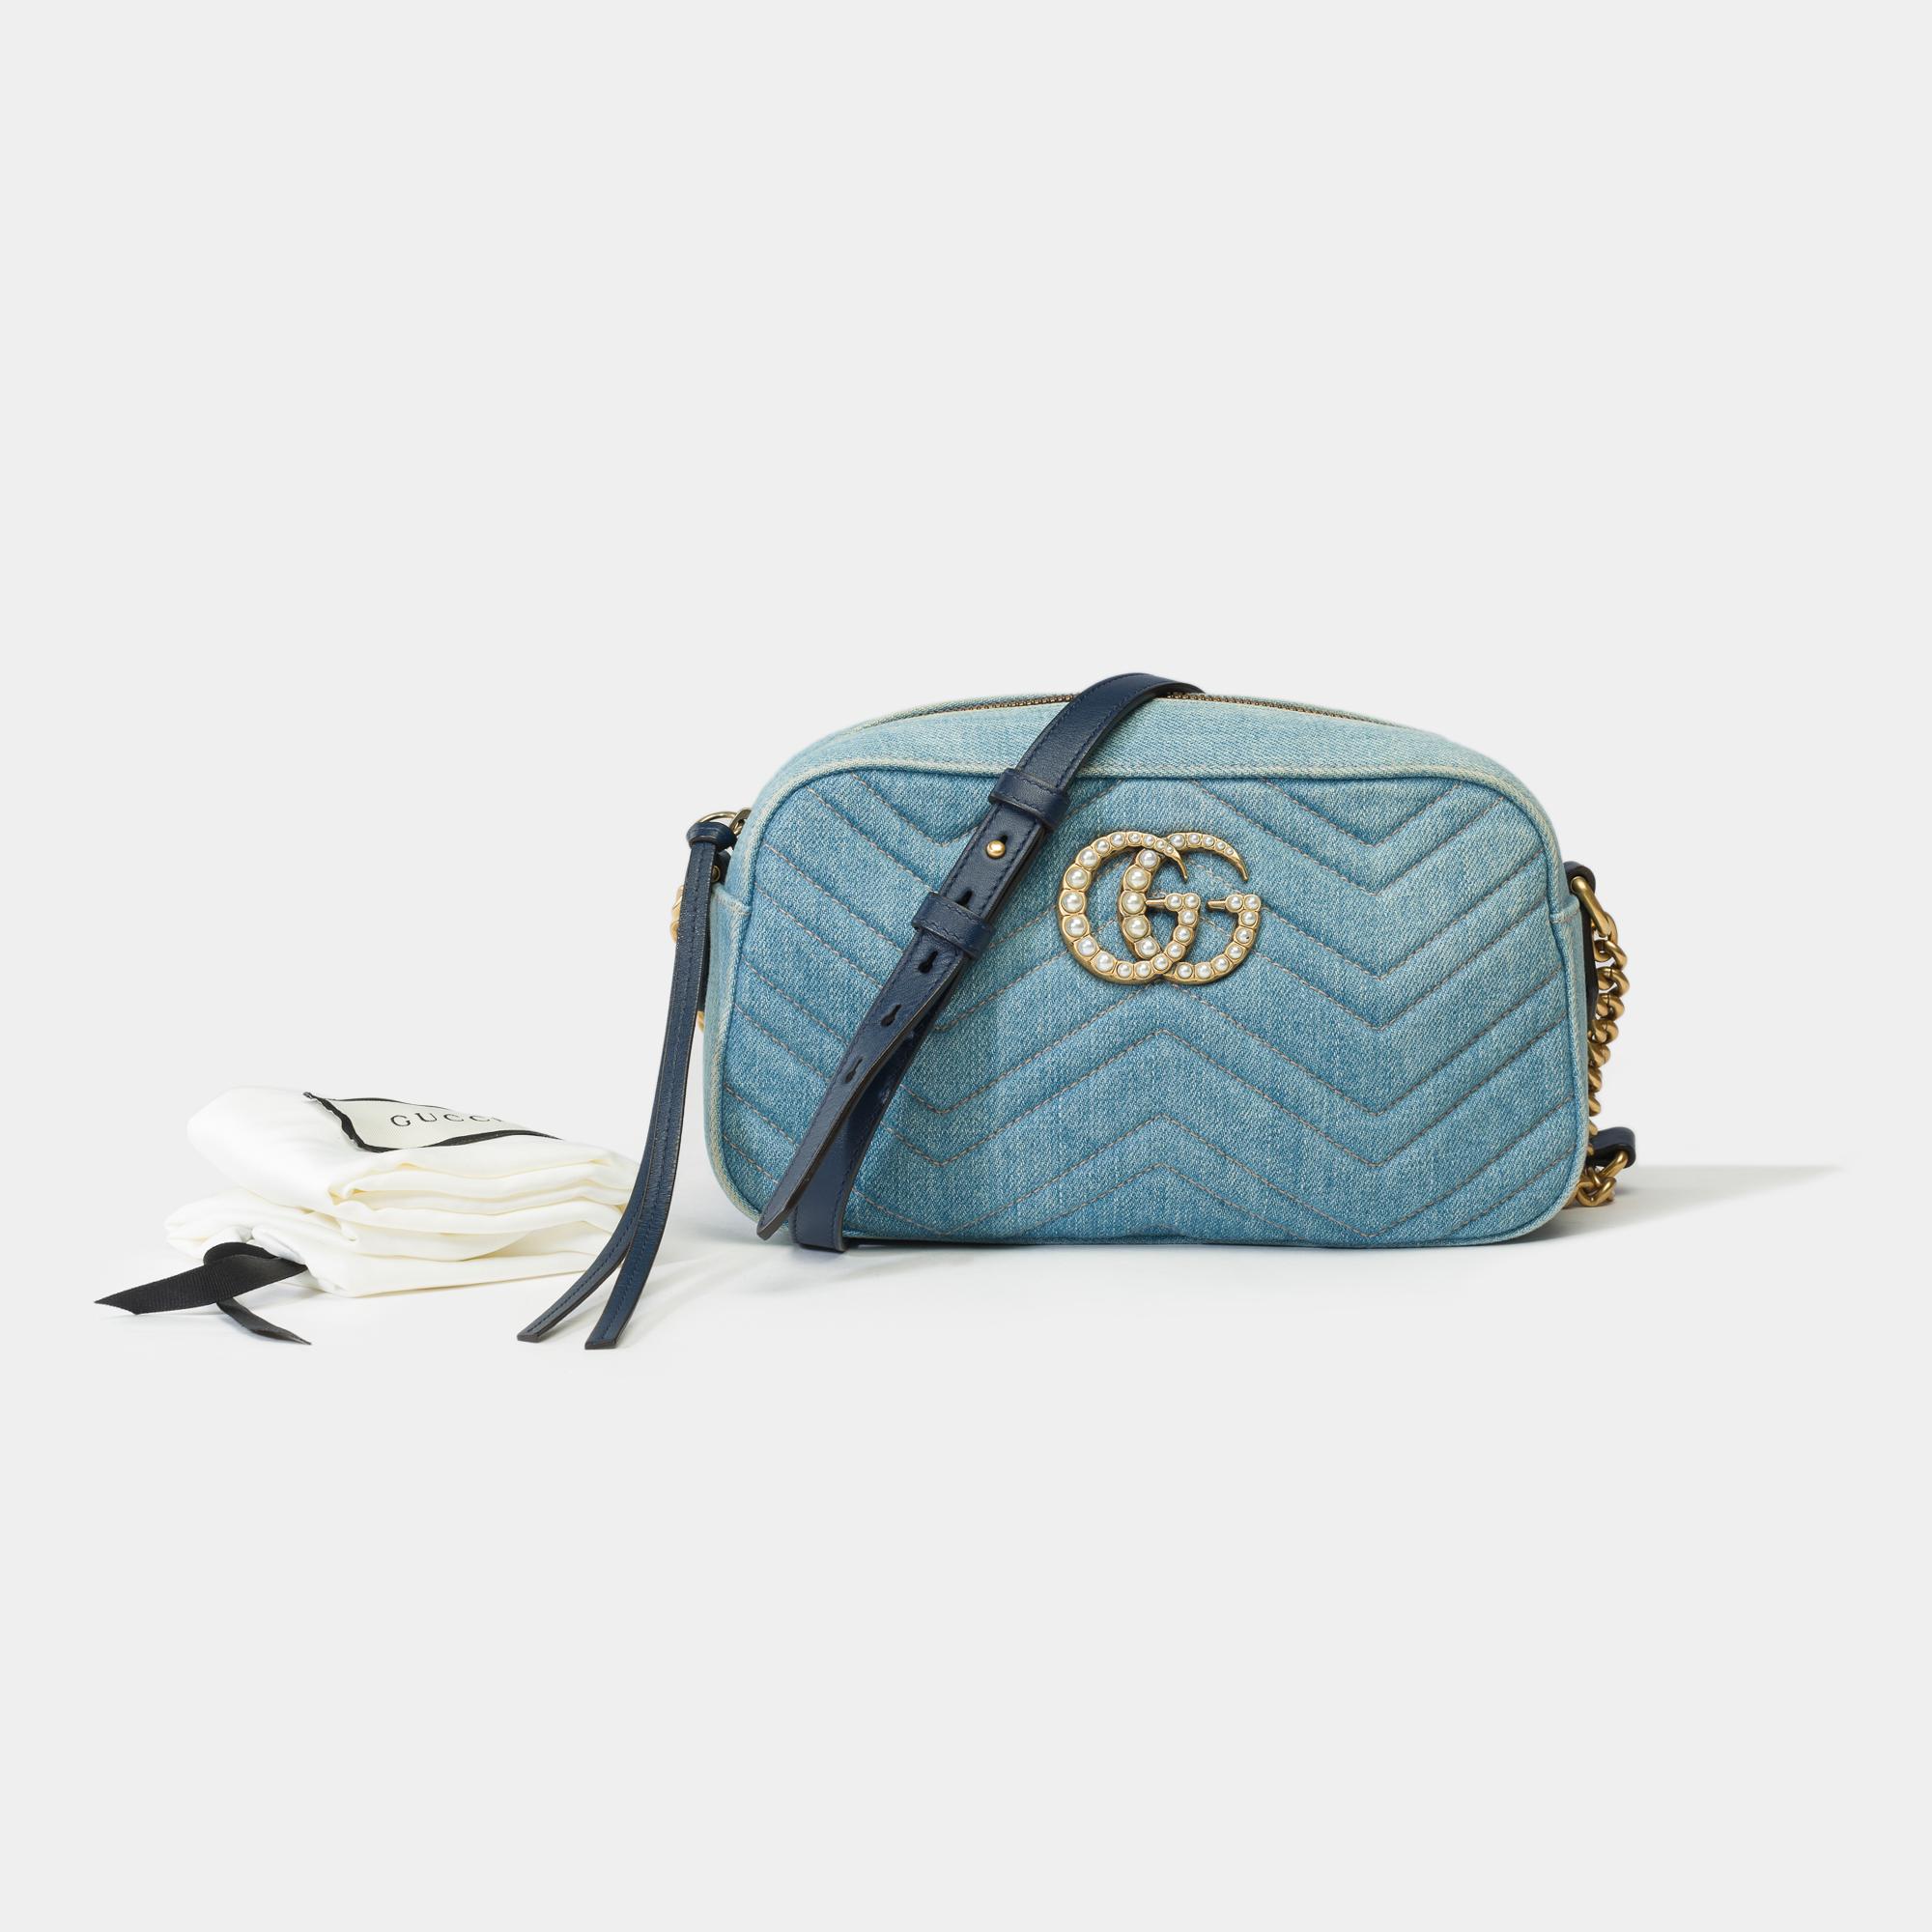 Elegant​ ​Gucci​ ​GG​ ​Pearly​ ​Marmont​ ​shoulder​ ​bag​ ​in​ ​blue​ ​denim,​ ​metal​ ​trim​ ​and​ ​gold​ ​beads,​ ​adjustable​ ​blue​ ​leather​ ​chain​ ​strap

Zipper
Interior​ ​lining​ ​in​ ​floral​ ​beige​ ​satin
A​ ​patch​ ​pocket
Dimensions:​